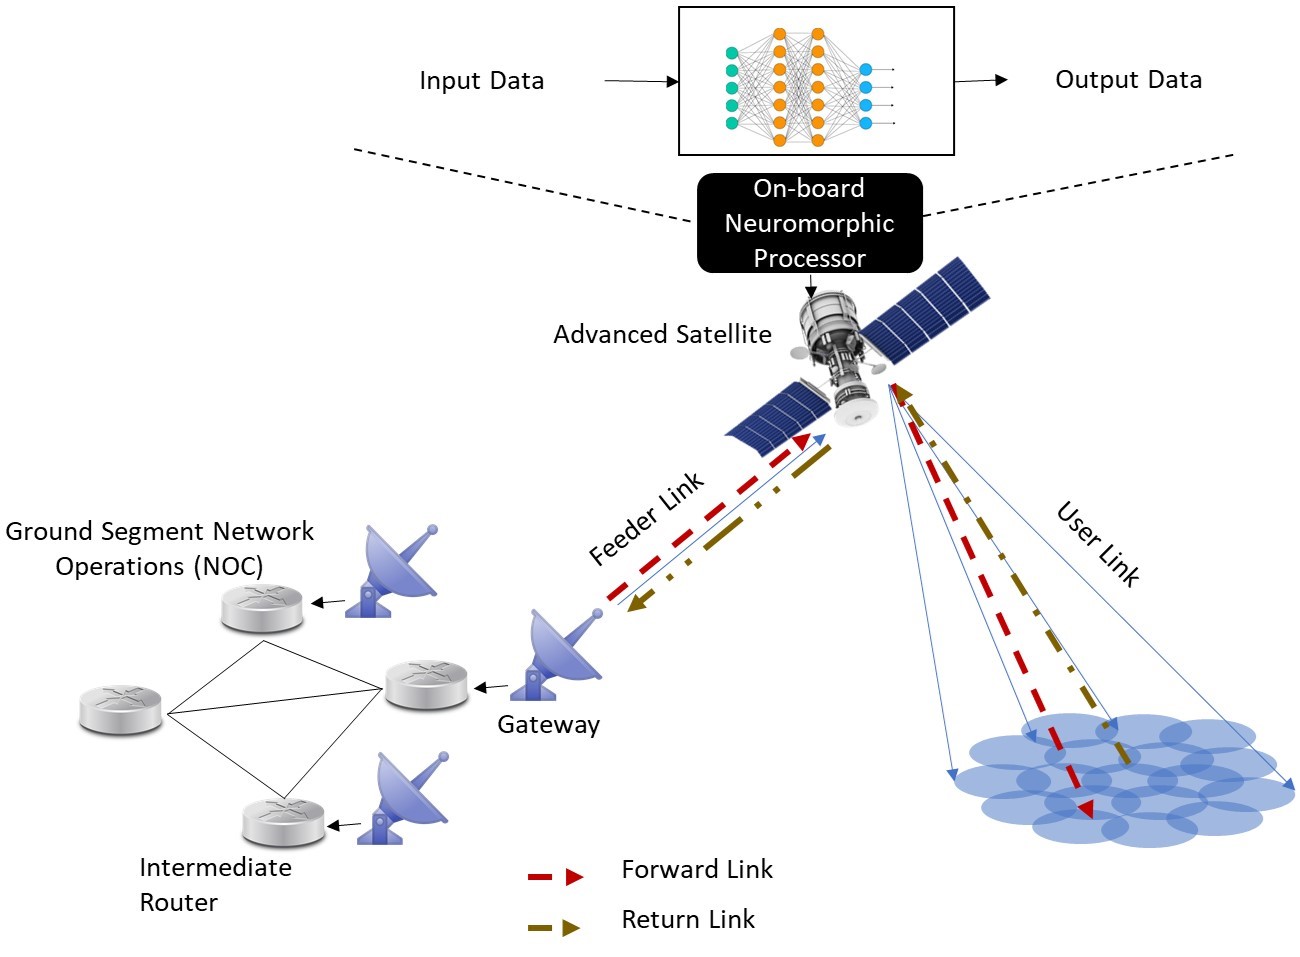 &quot;Figure (2) Advanced SatCom systems with onboard NPs to automate decision making&quot;